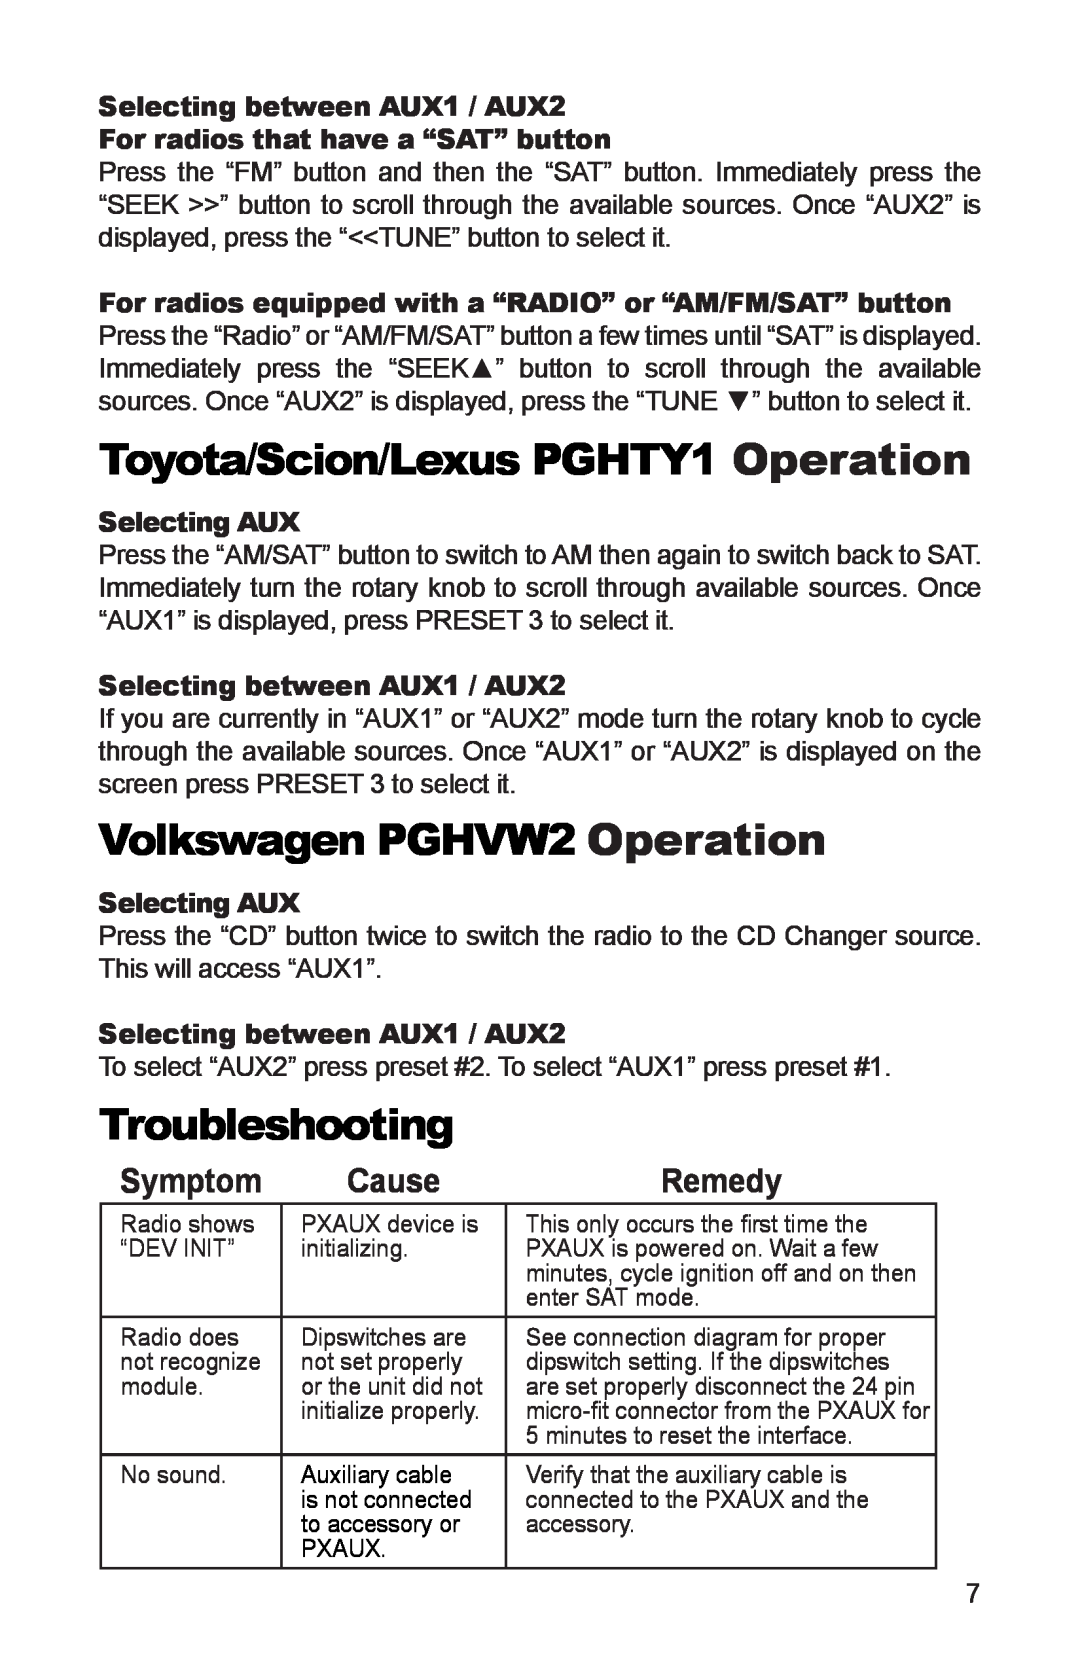 iSimple PGHGM3 Toyota/Scion/Lexus PGHTY1 Operation, Volkswagen PGHVW2 Operation, Troubleshooting, Symptom, Cause, Remedy 